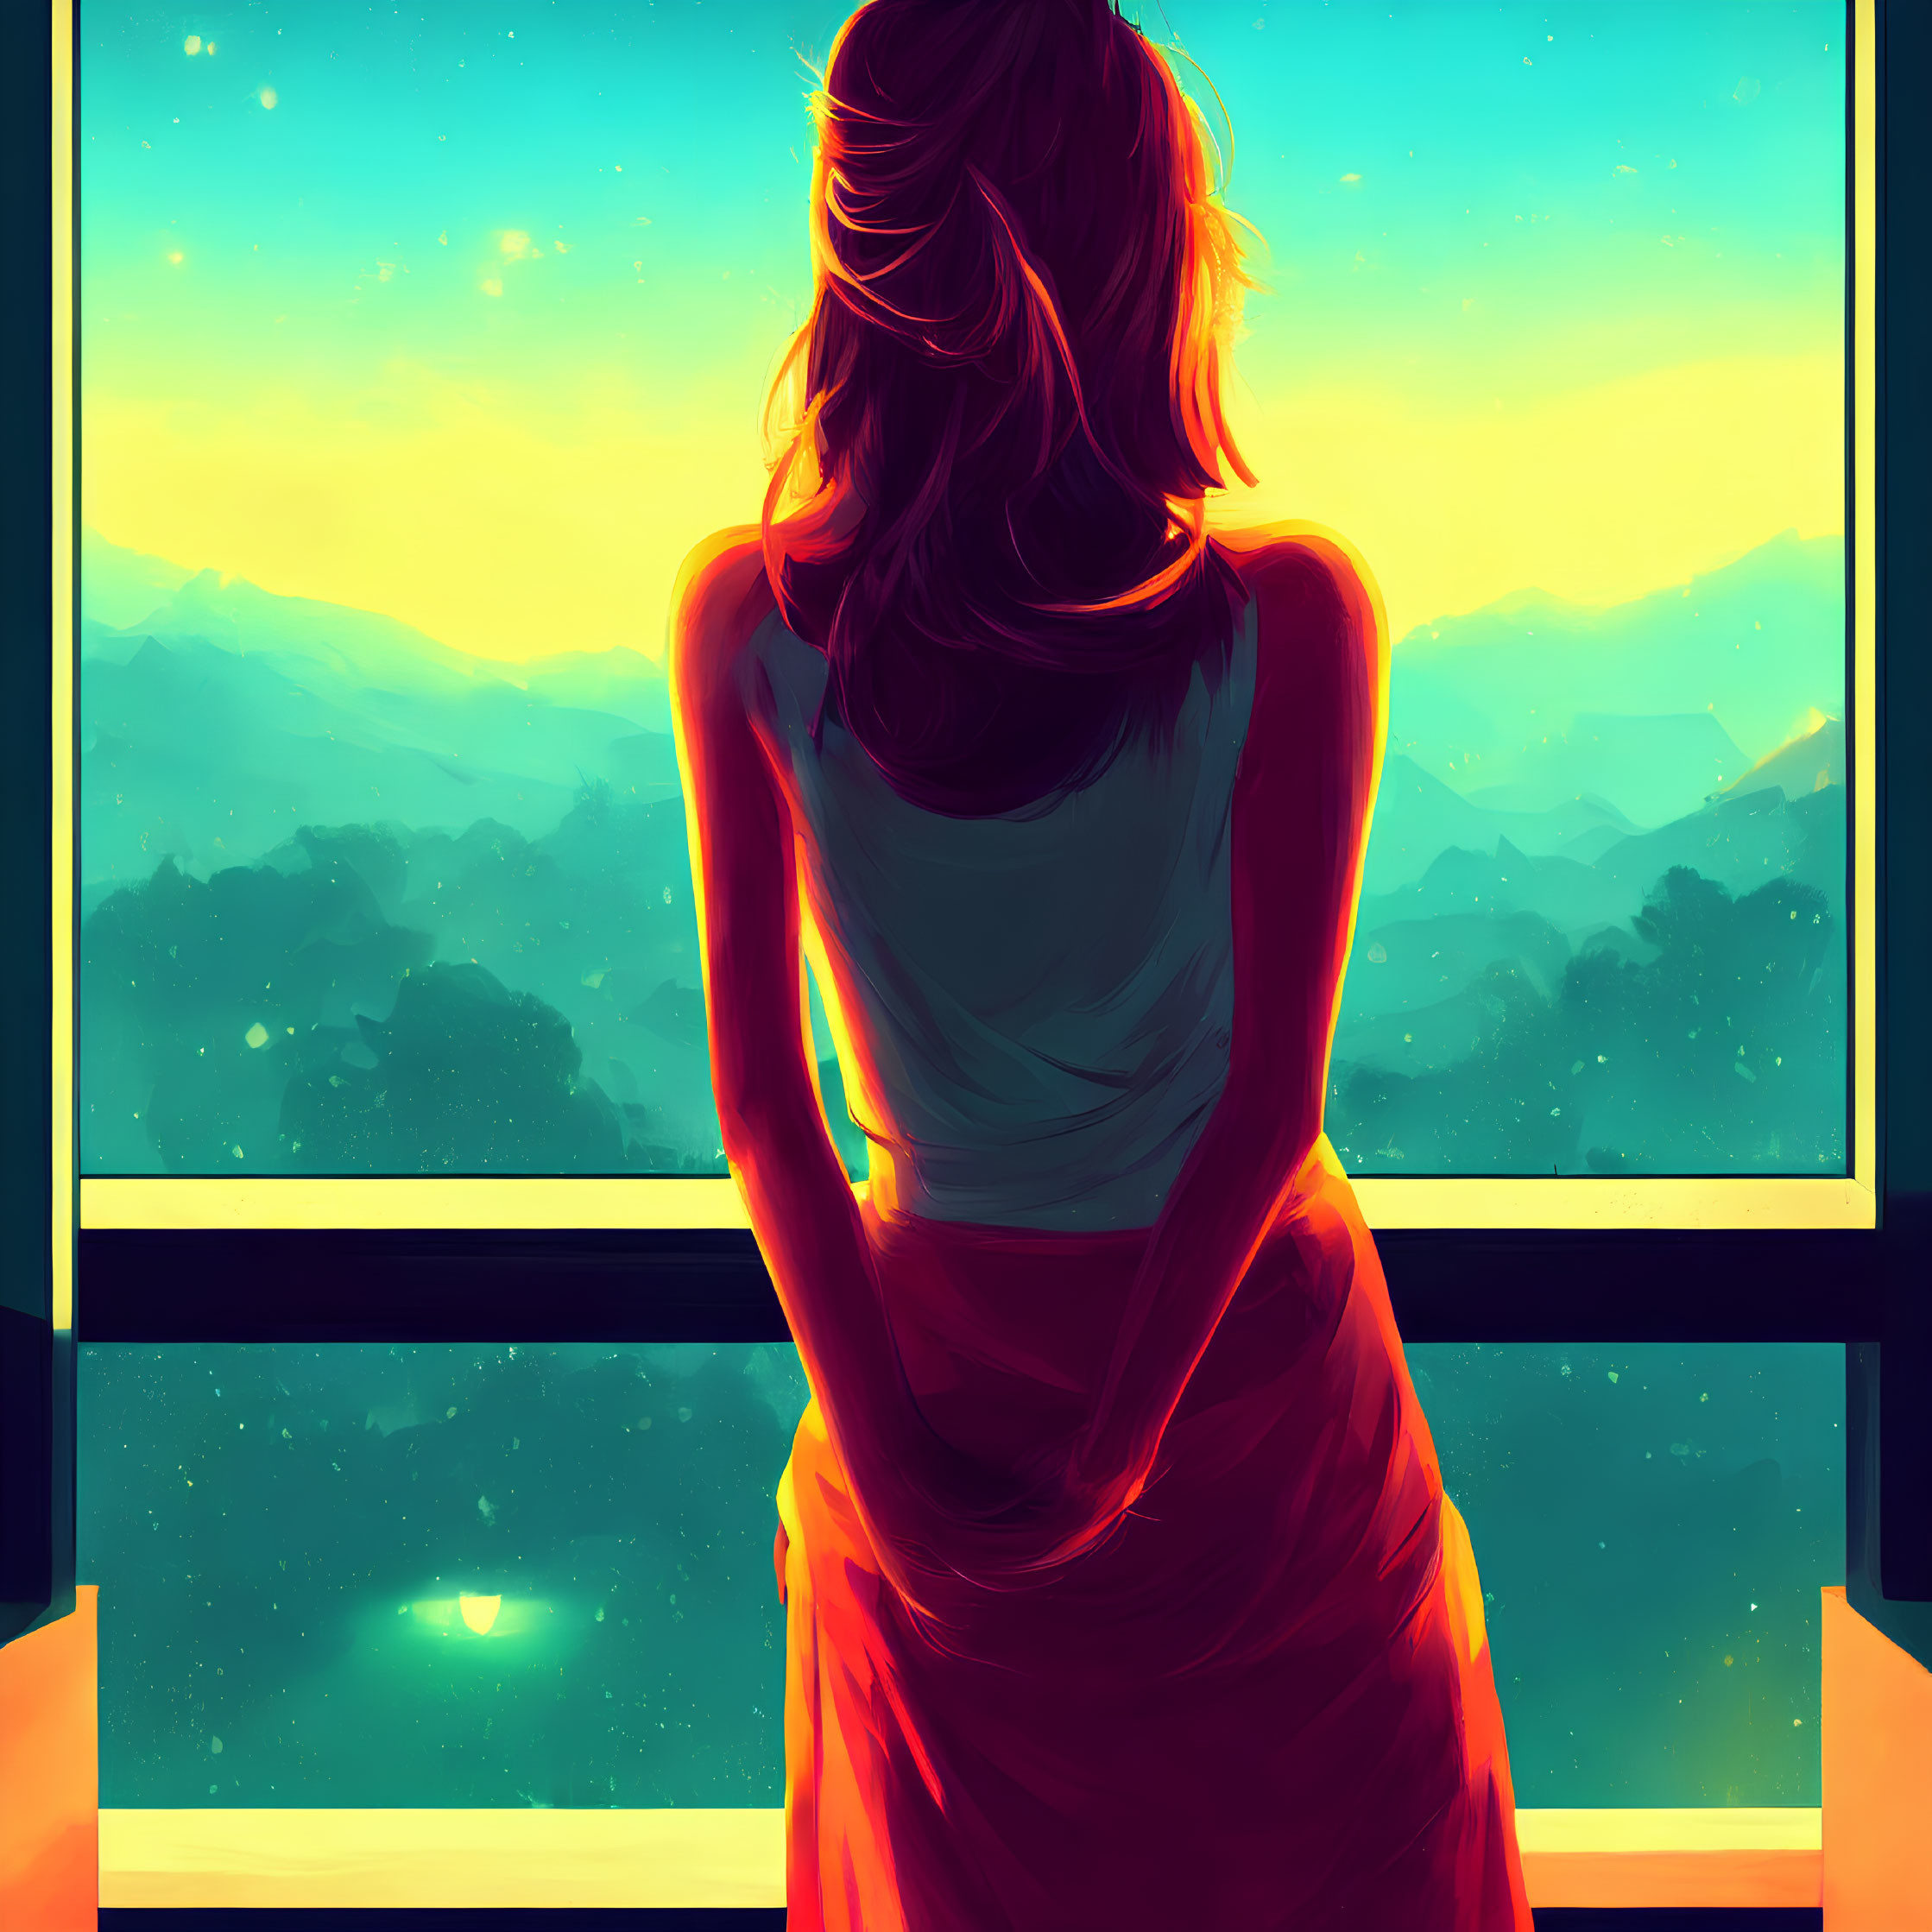 Woman in Red Dress Looking at Sunset over Mountains from Large Window